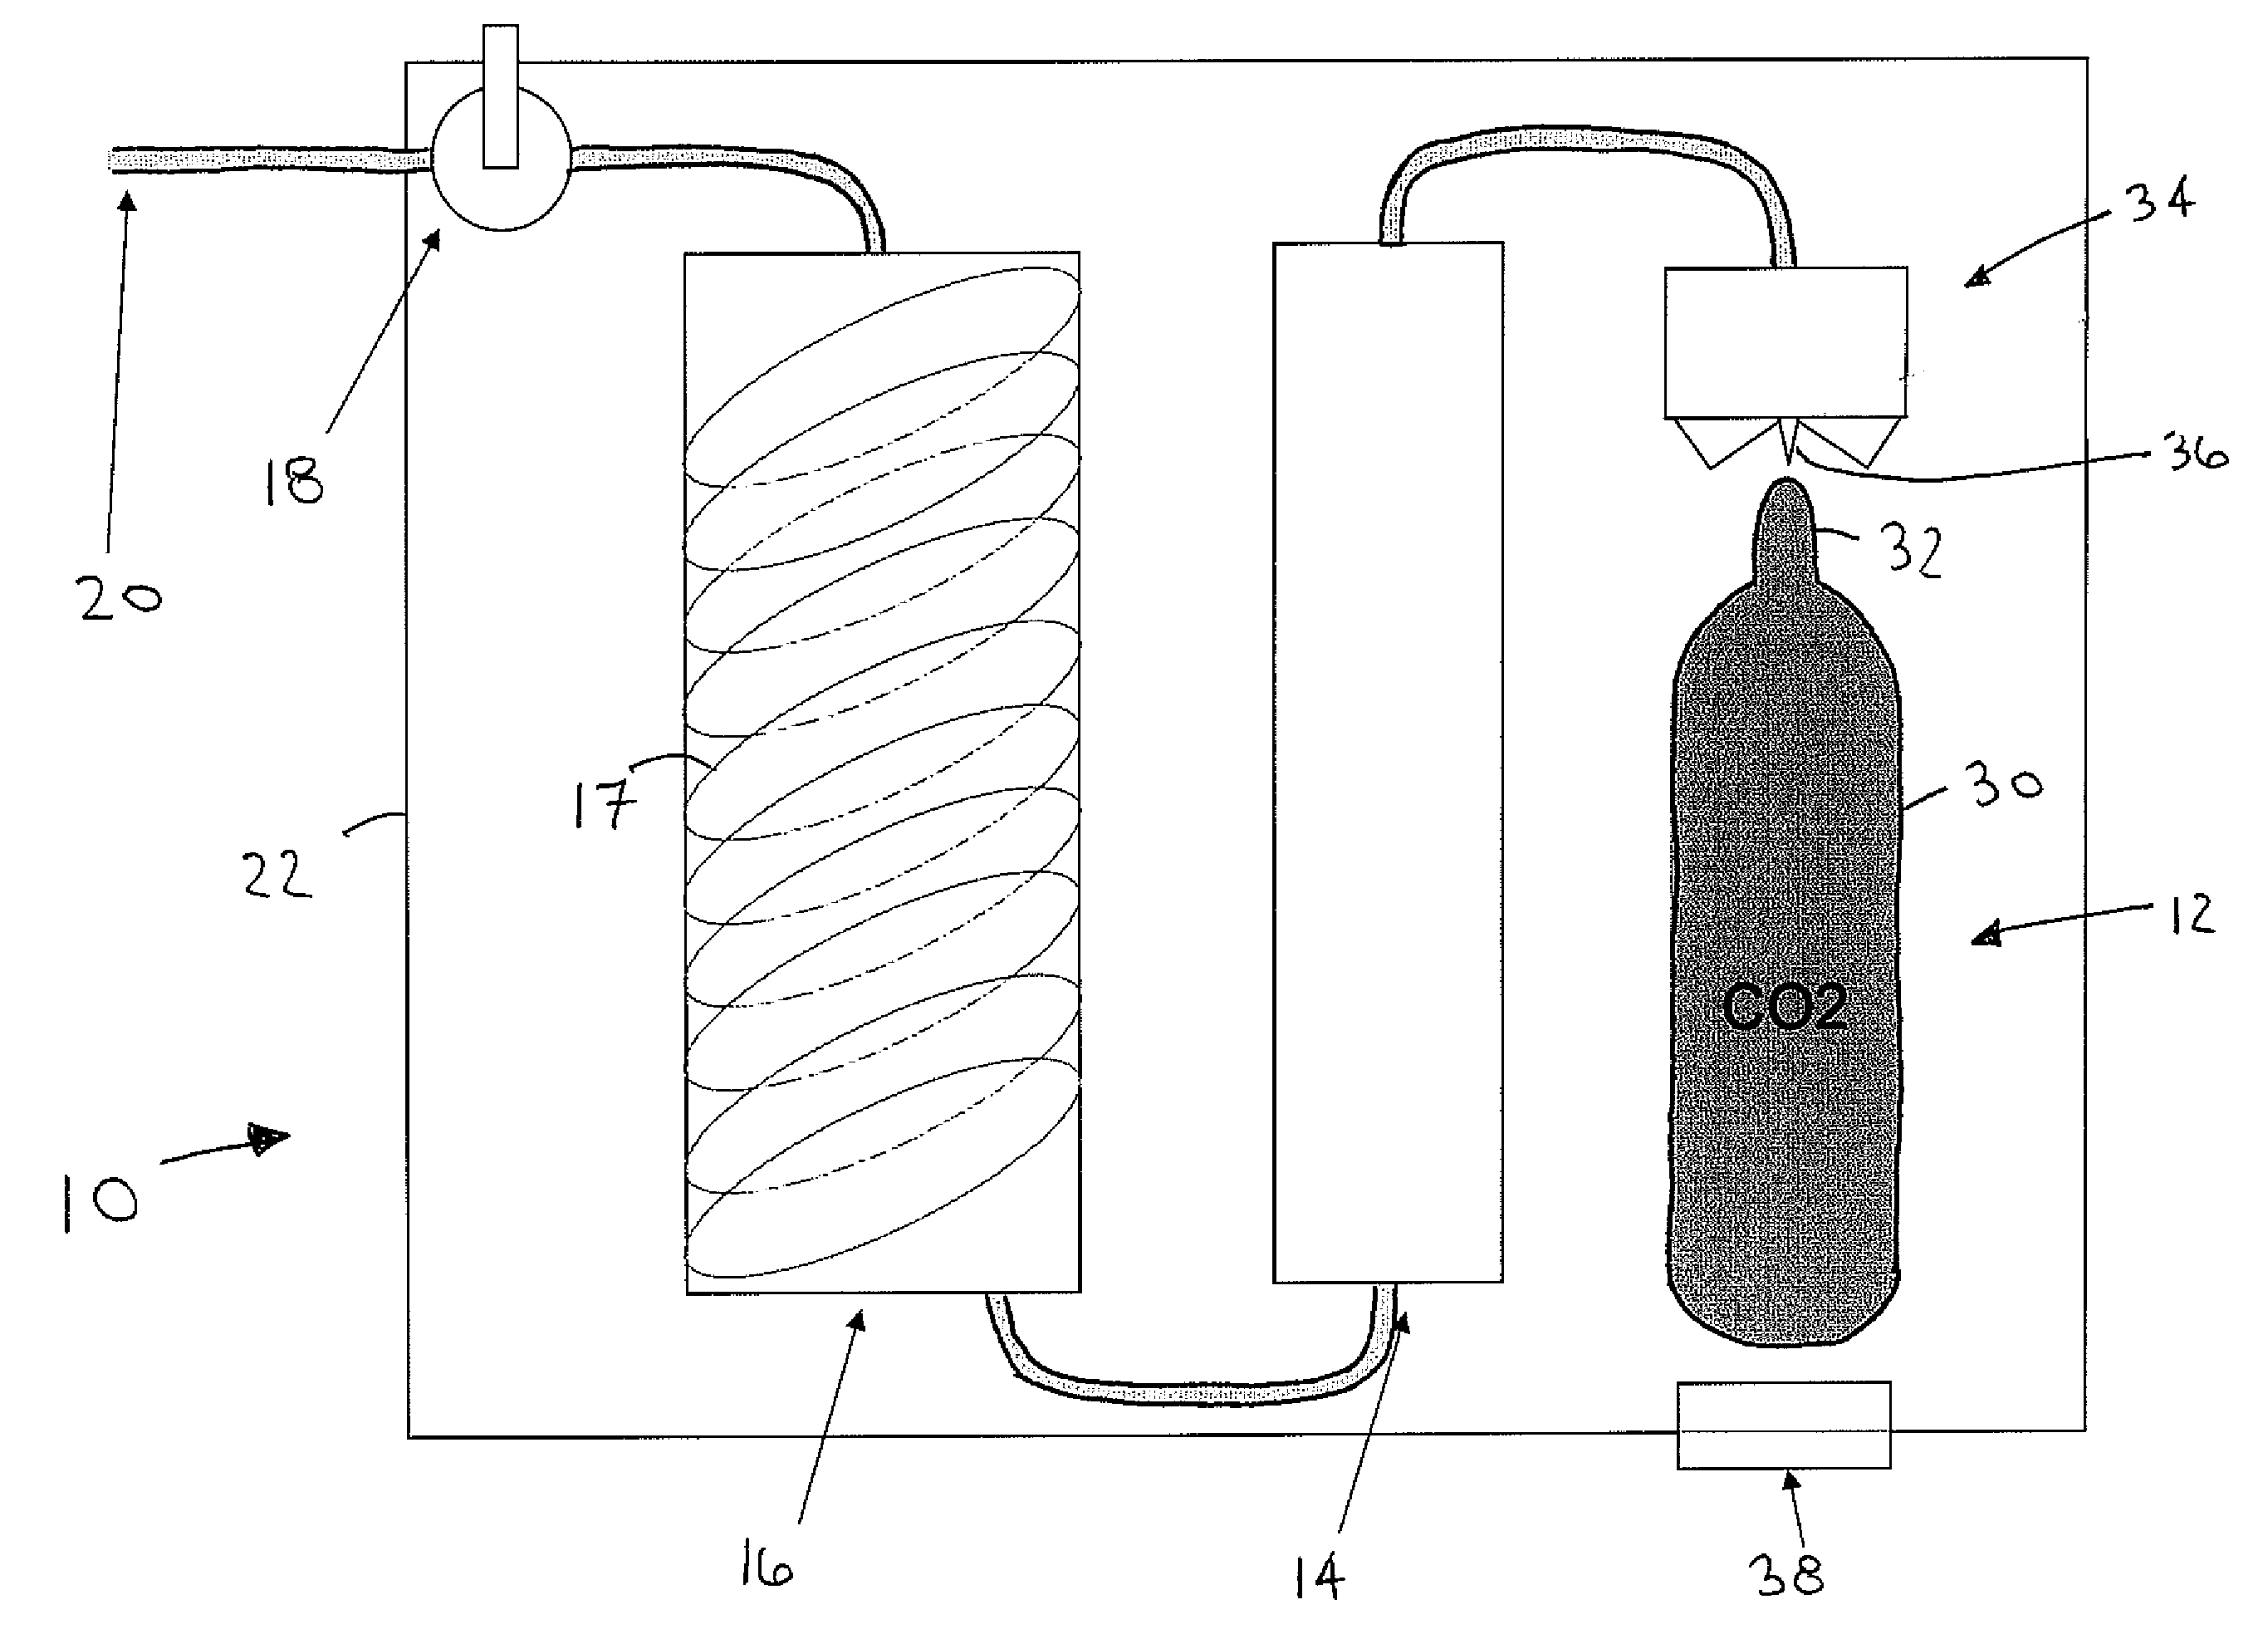 Apparatus and methods for flushing medical devices